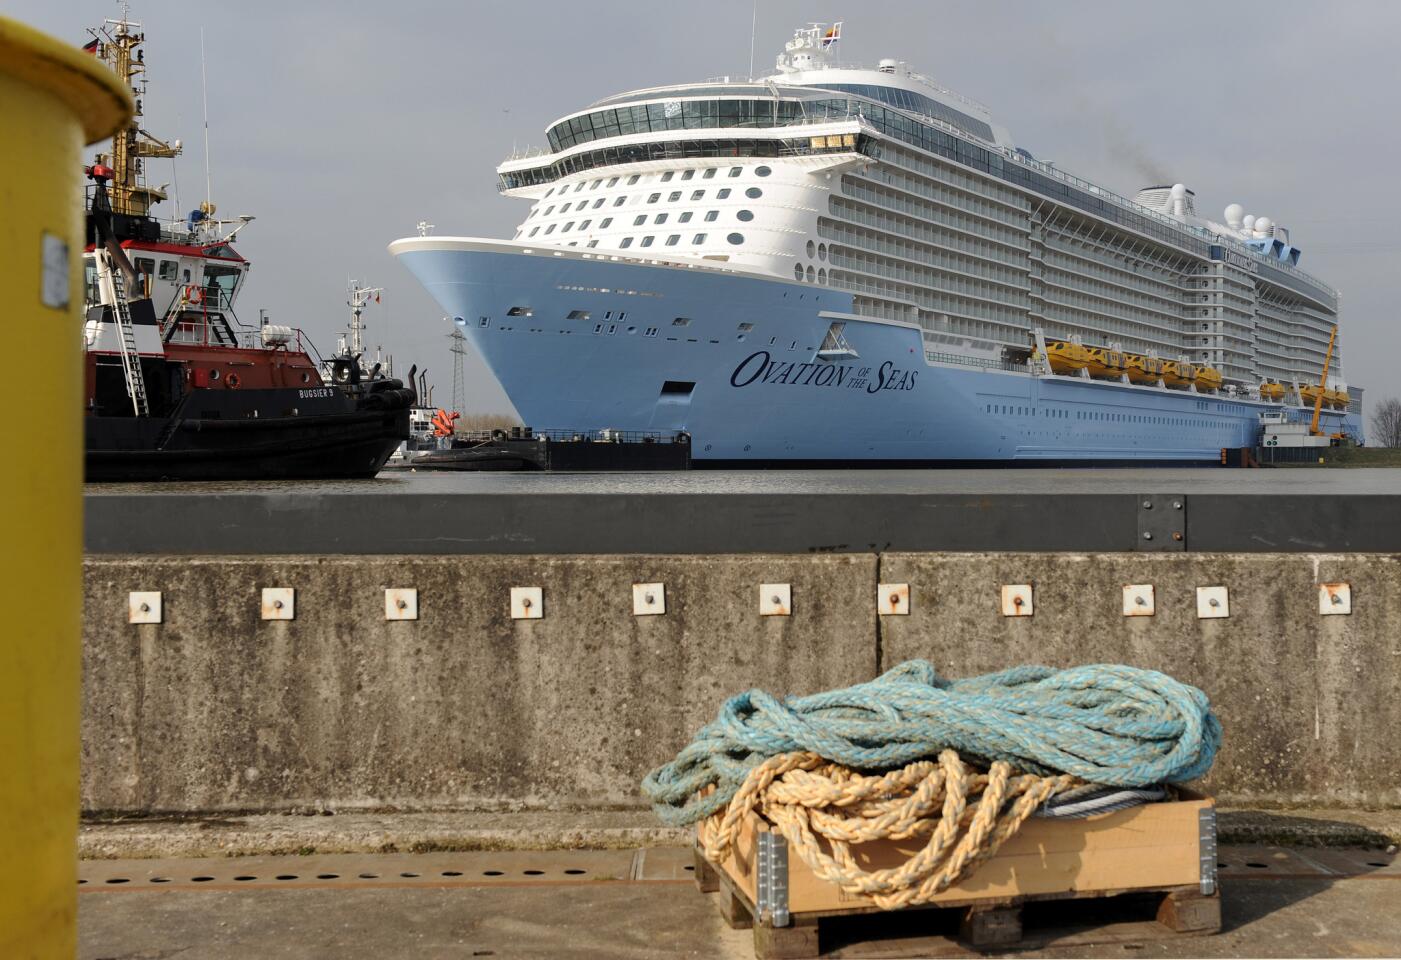 The newest cruise ship of the Meyer Werft shipyard, Ovation of the Seas, is prepared for its transfer to the North Sea on the Ems River in Papenburg, Germany, Friday March 11, 2016. The 348 meter long passenger ship is heading to the Dutch city of Eemshaven first and will later continue to the Bremerhaven, Germany to be prepared for the delivery to Royal Caribbean International.